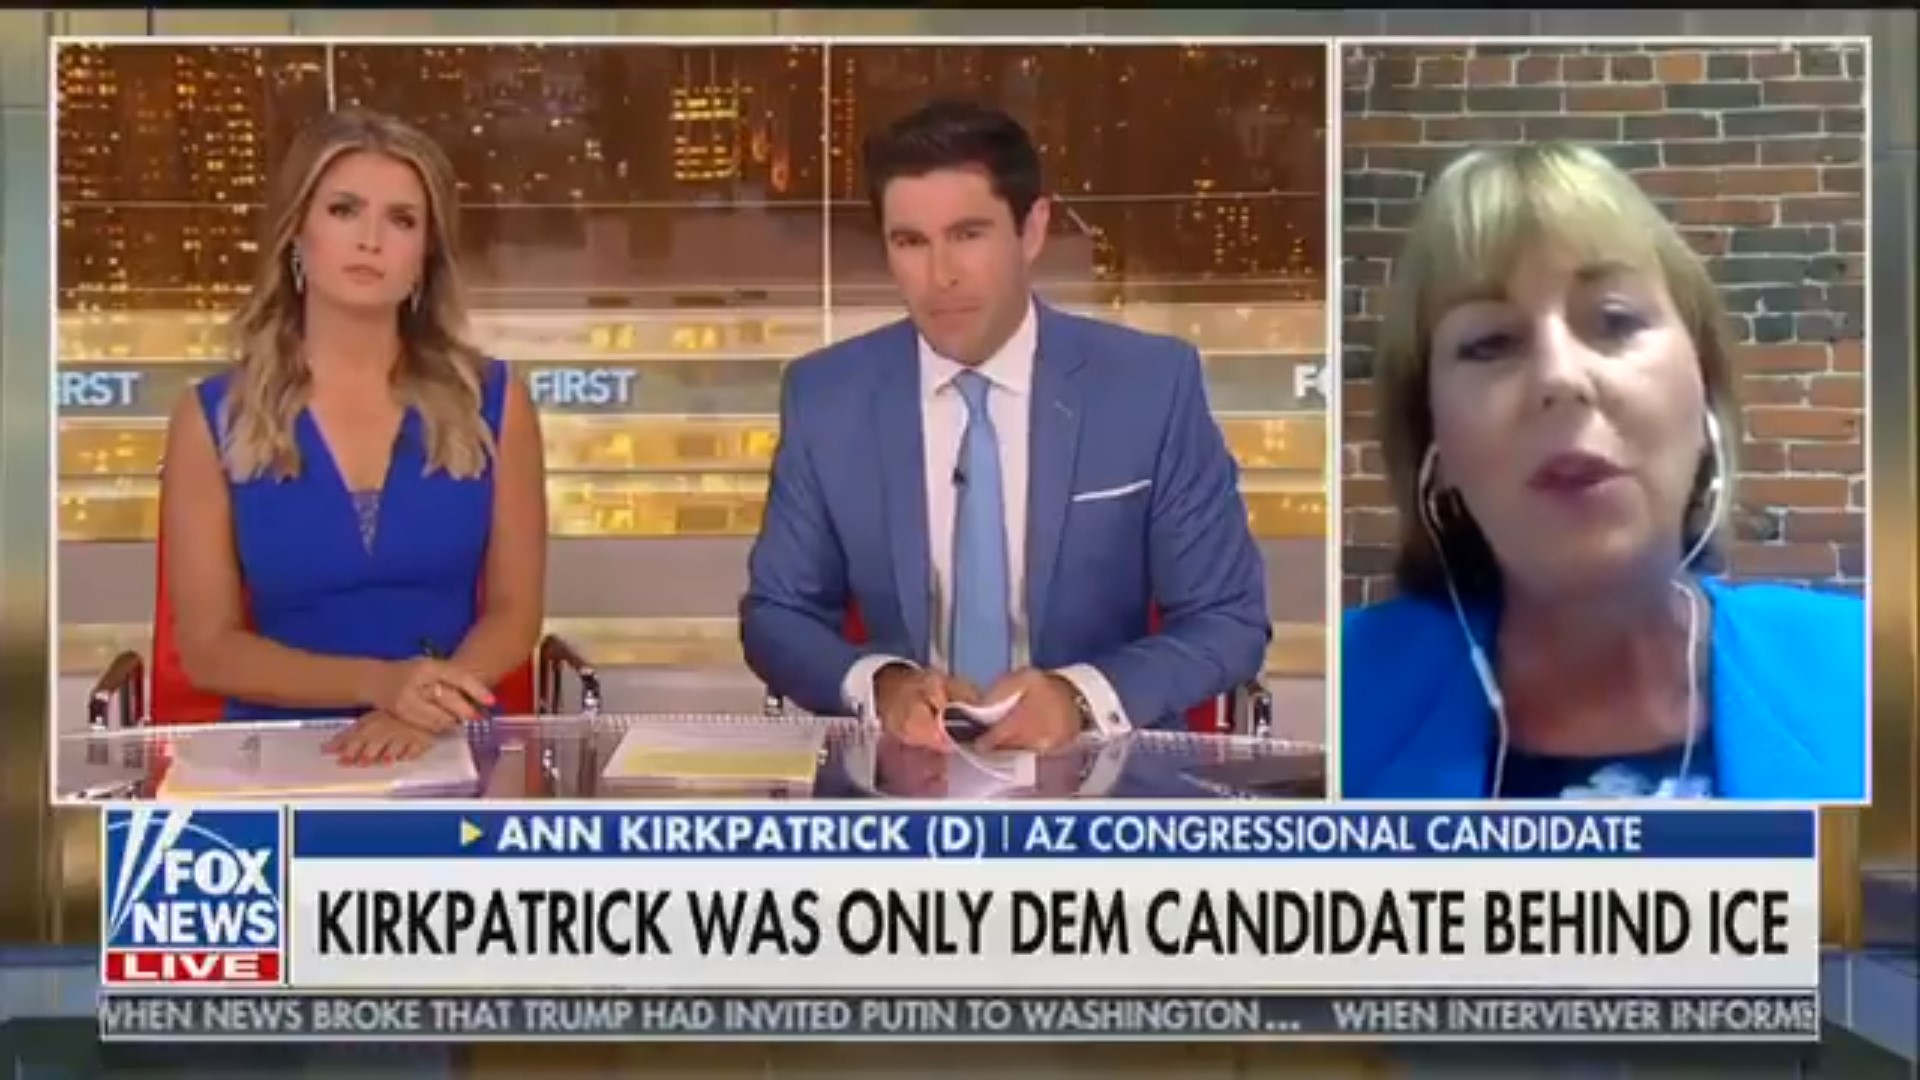 Fox News Thought They Booked Pro-ICE Democrat, Gets Fiery Anti-Trump Candidate Instead